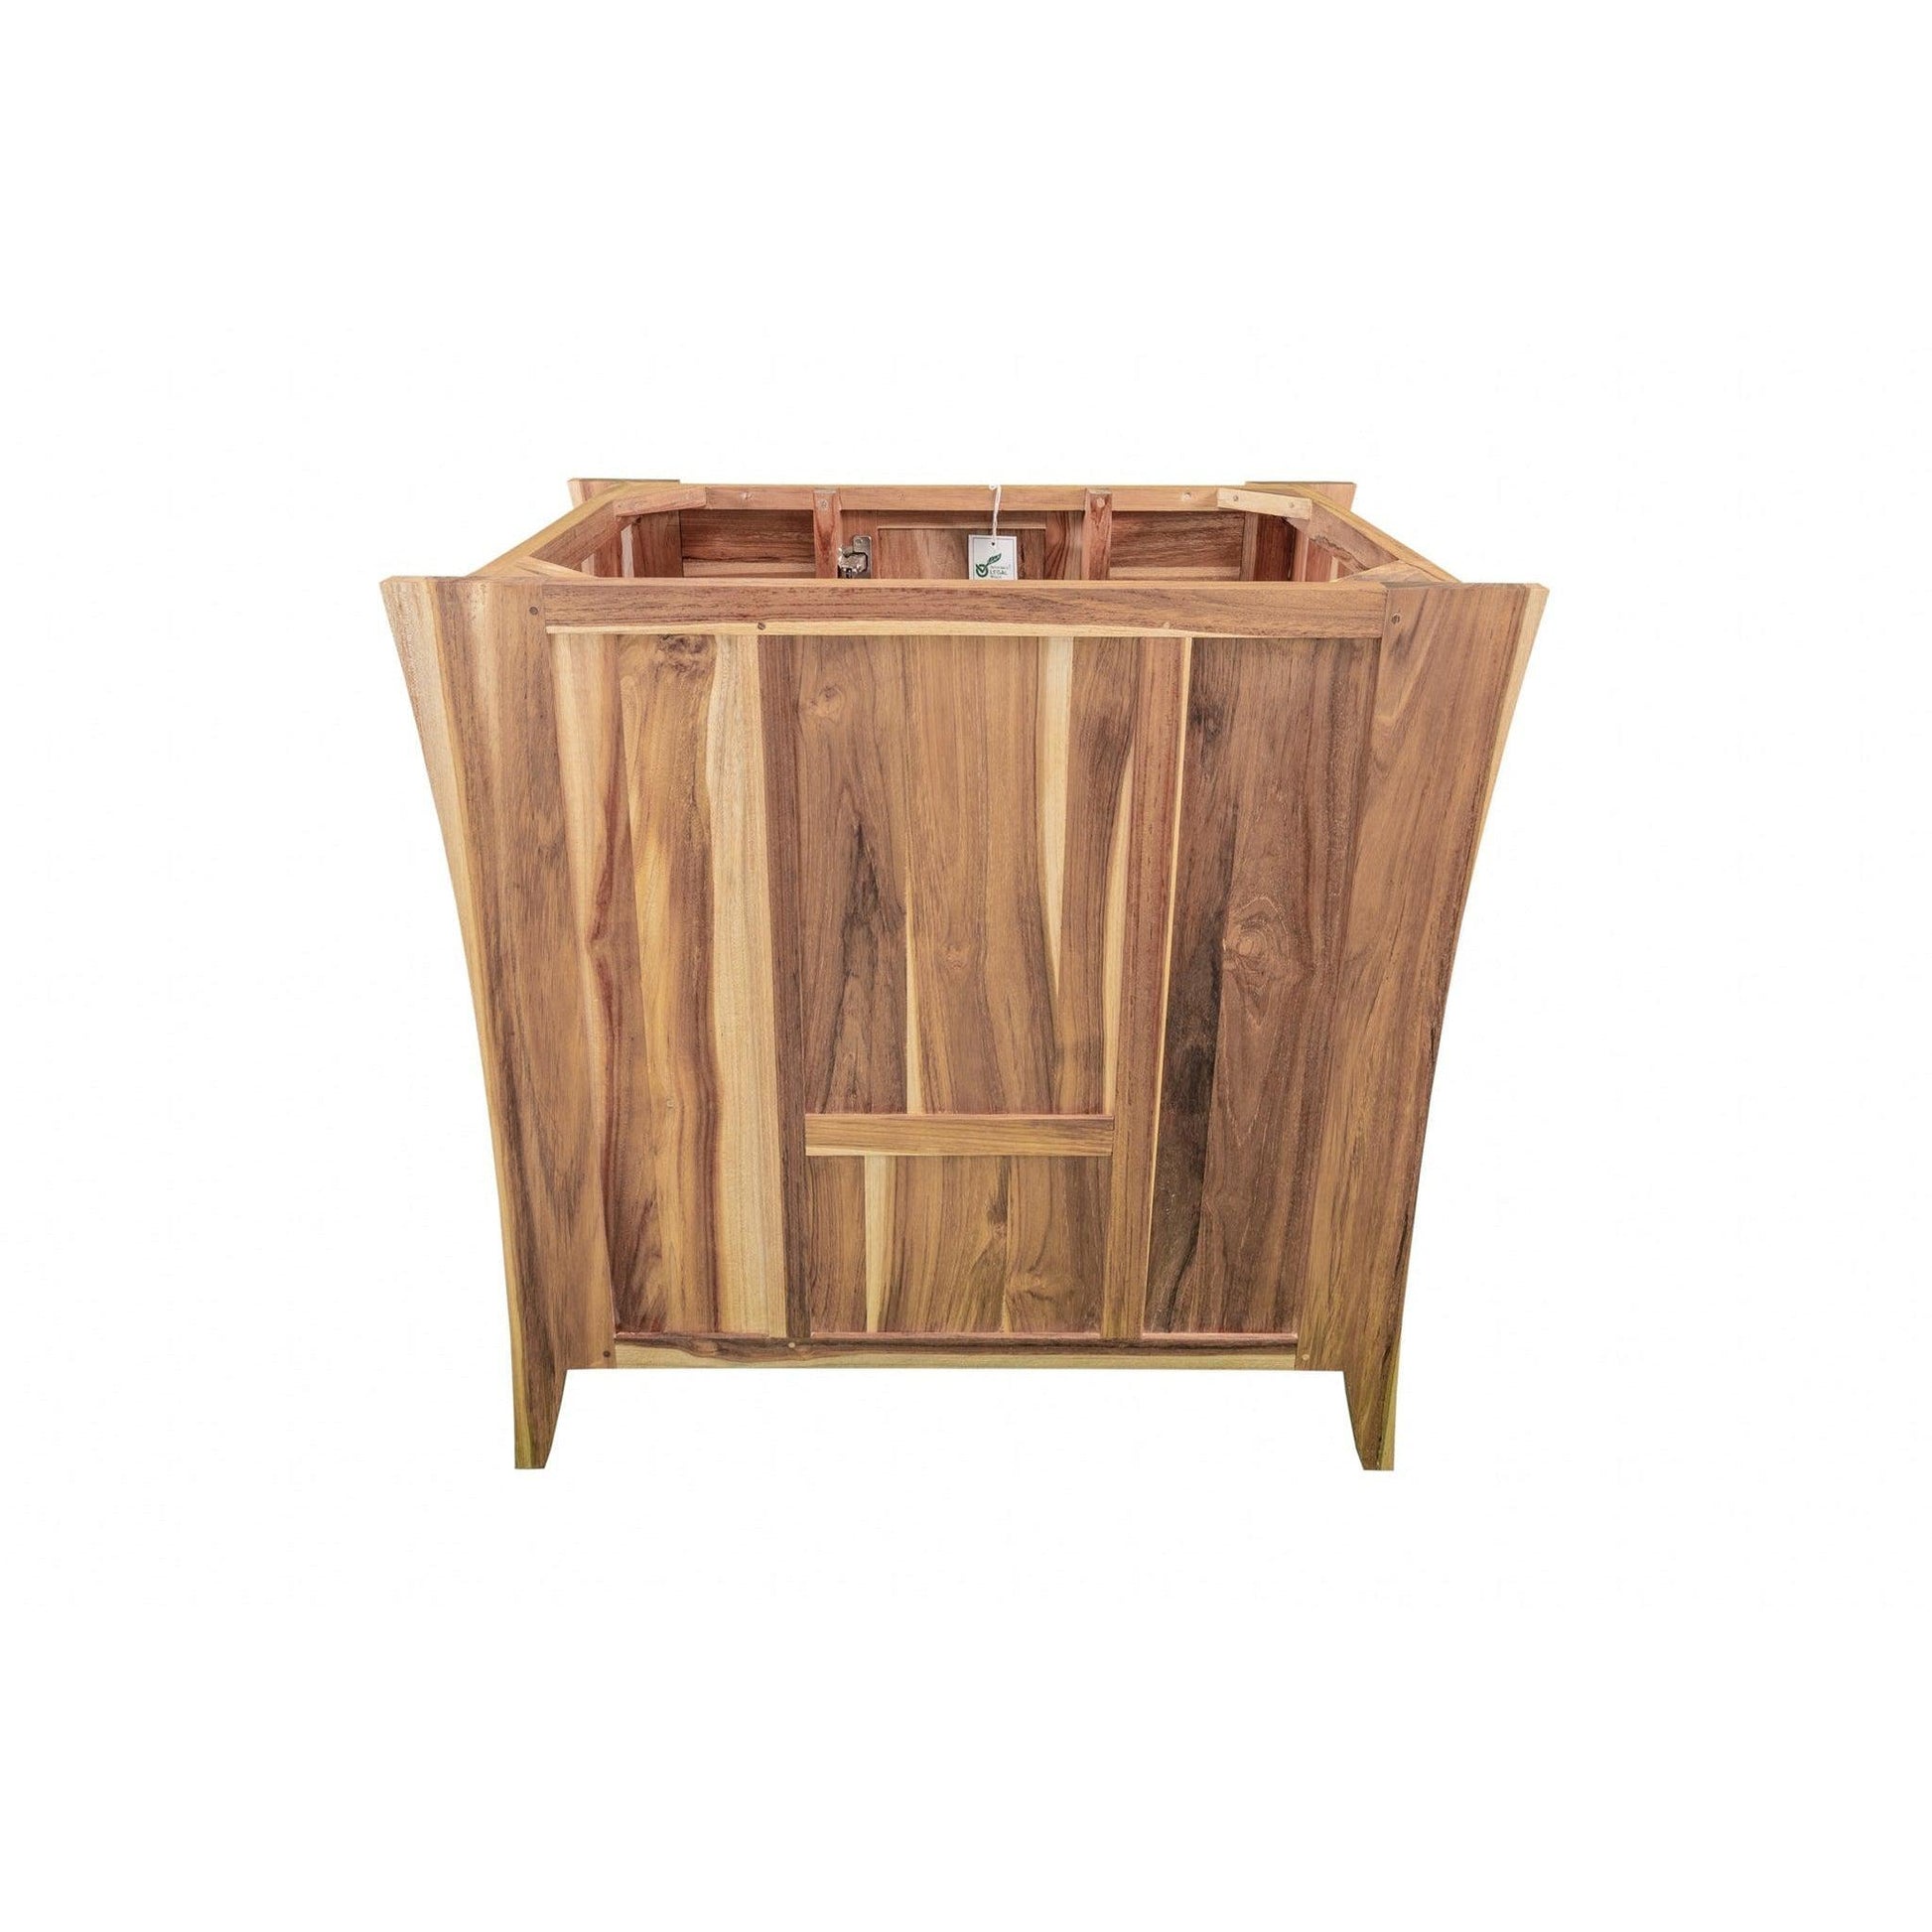 EcoDecors Curvature 36" EarthyTeak Solid Teak Wood Fully Assembled Freestanding Vanity Base For Drop-in Sink